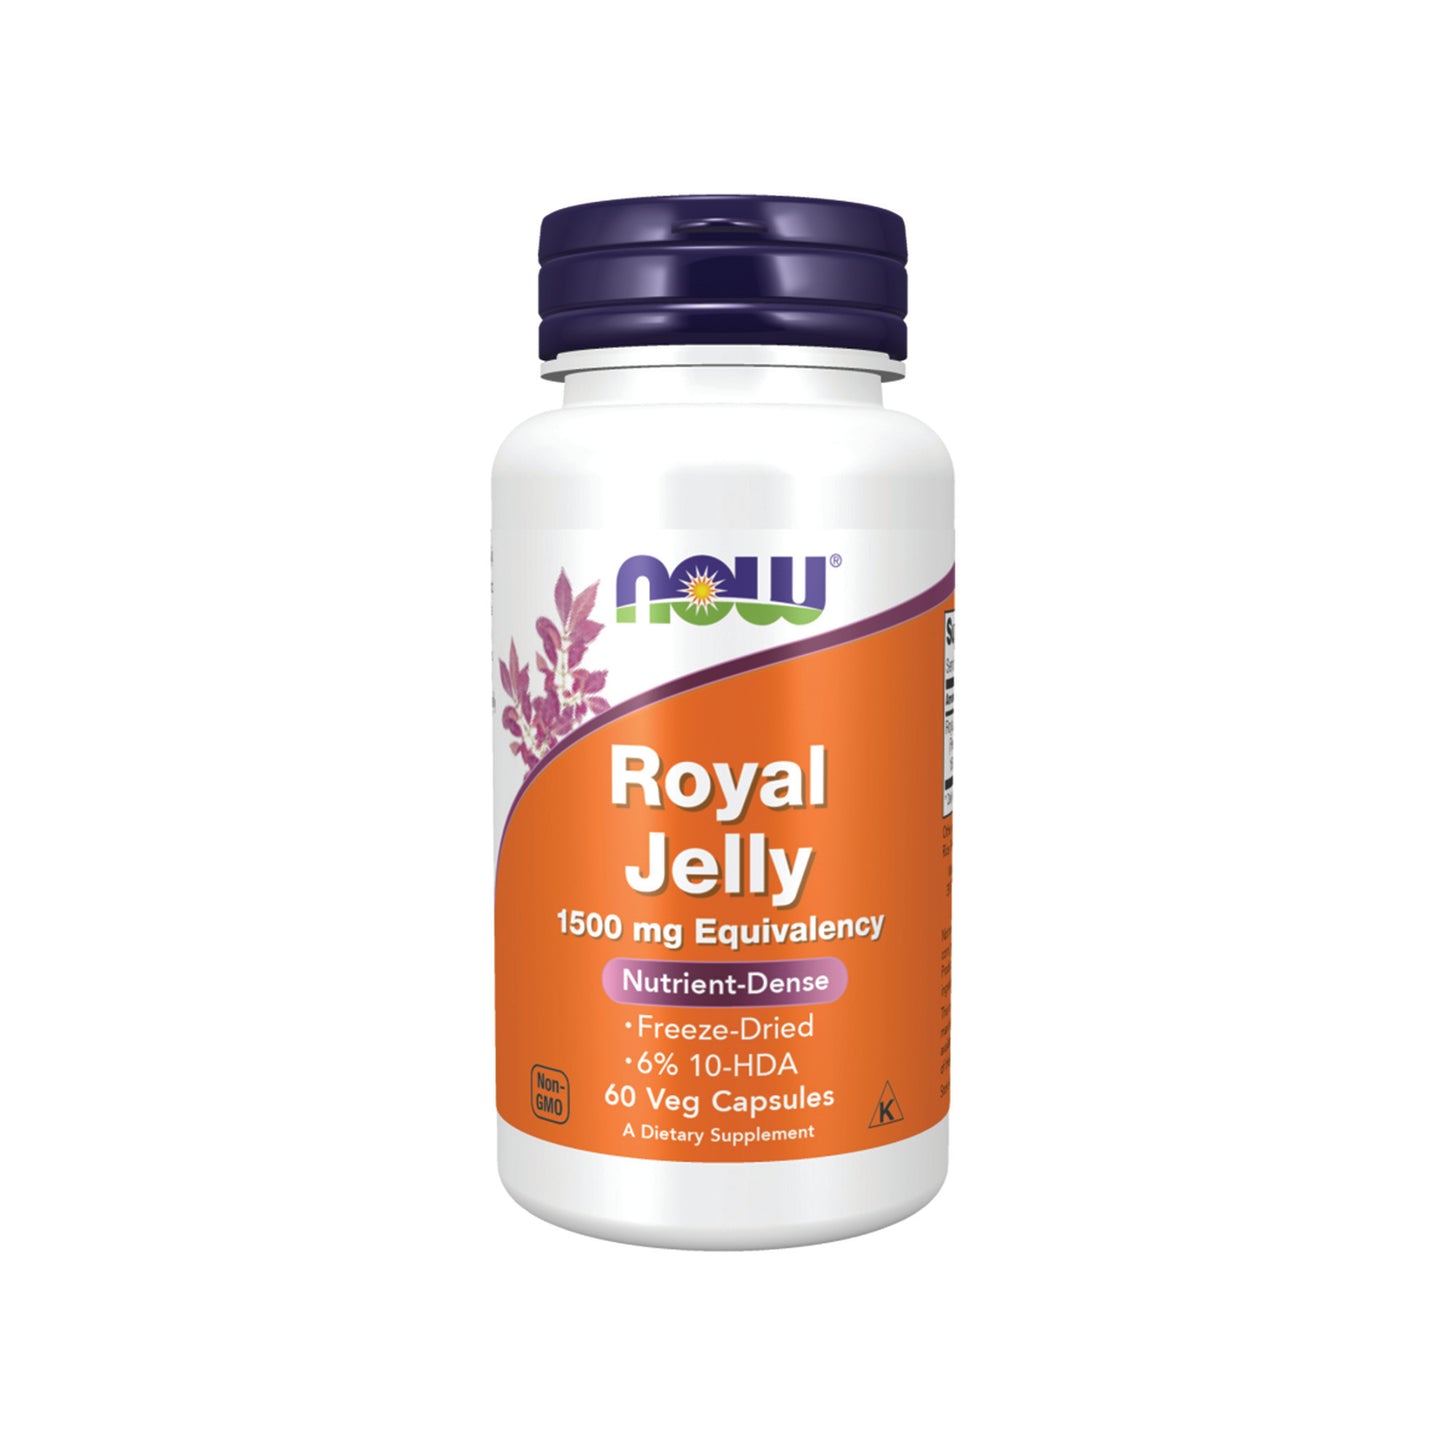 NOW Foods Royal Jelly, 1500 mg Equivalency - 60 Veg Capsules